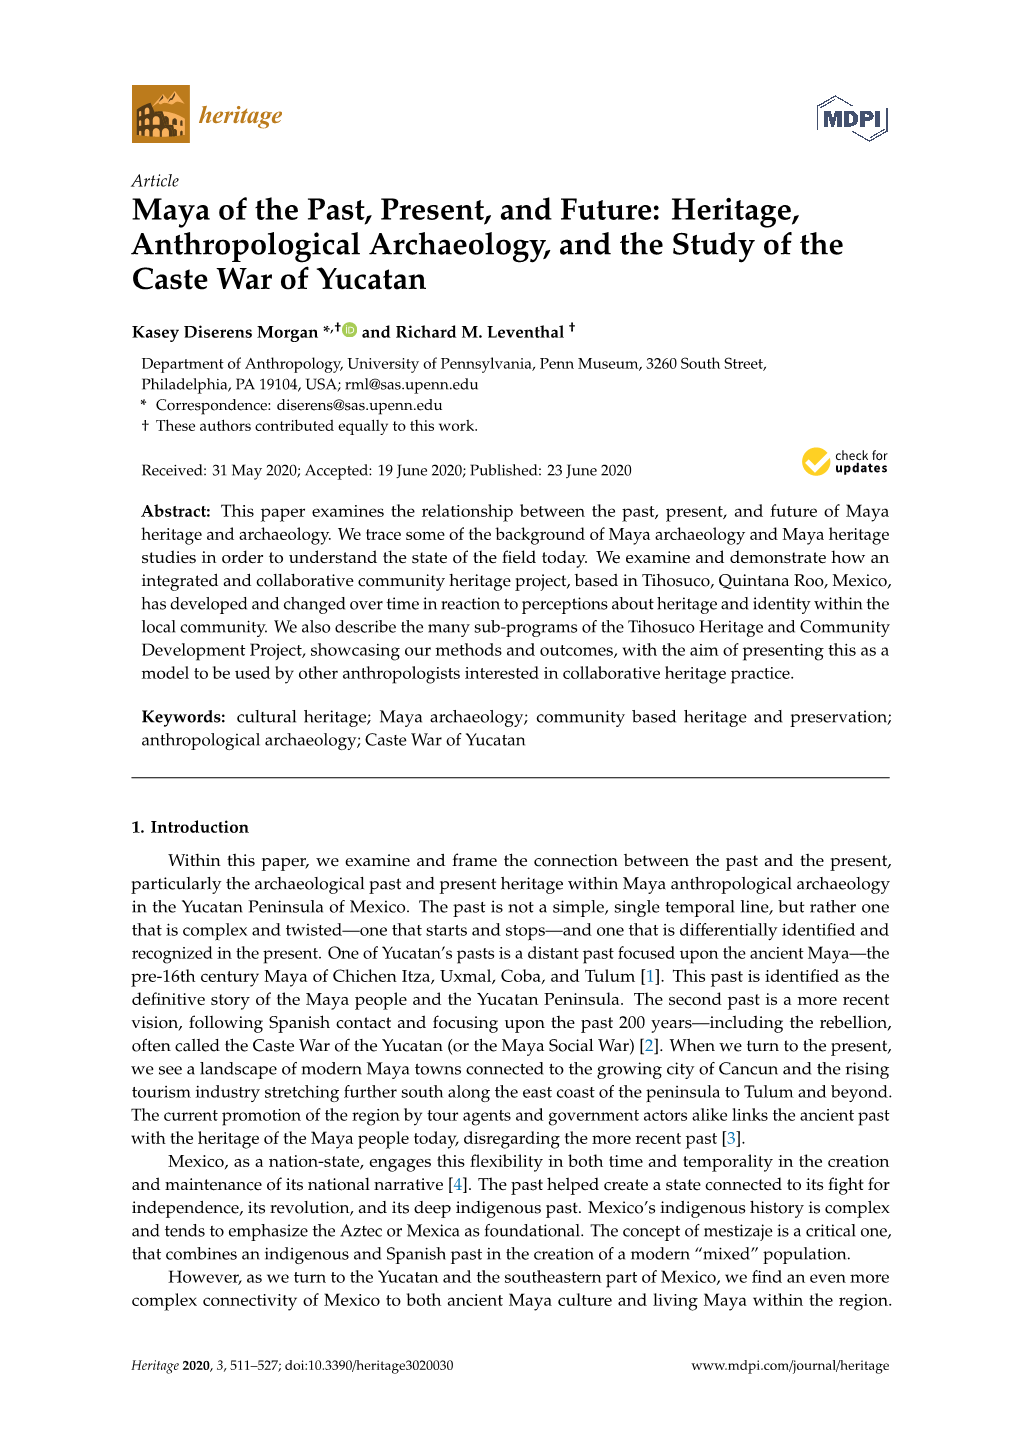 Maya of the Past, Present, and Future: Heritage, Anthropological Archaeology, and the Study of the Caste War of Yucatan